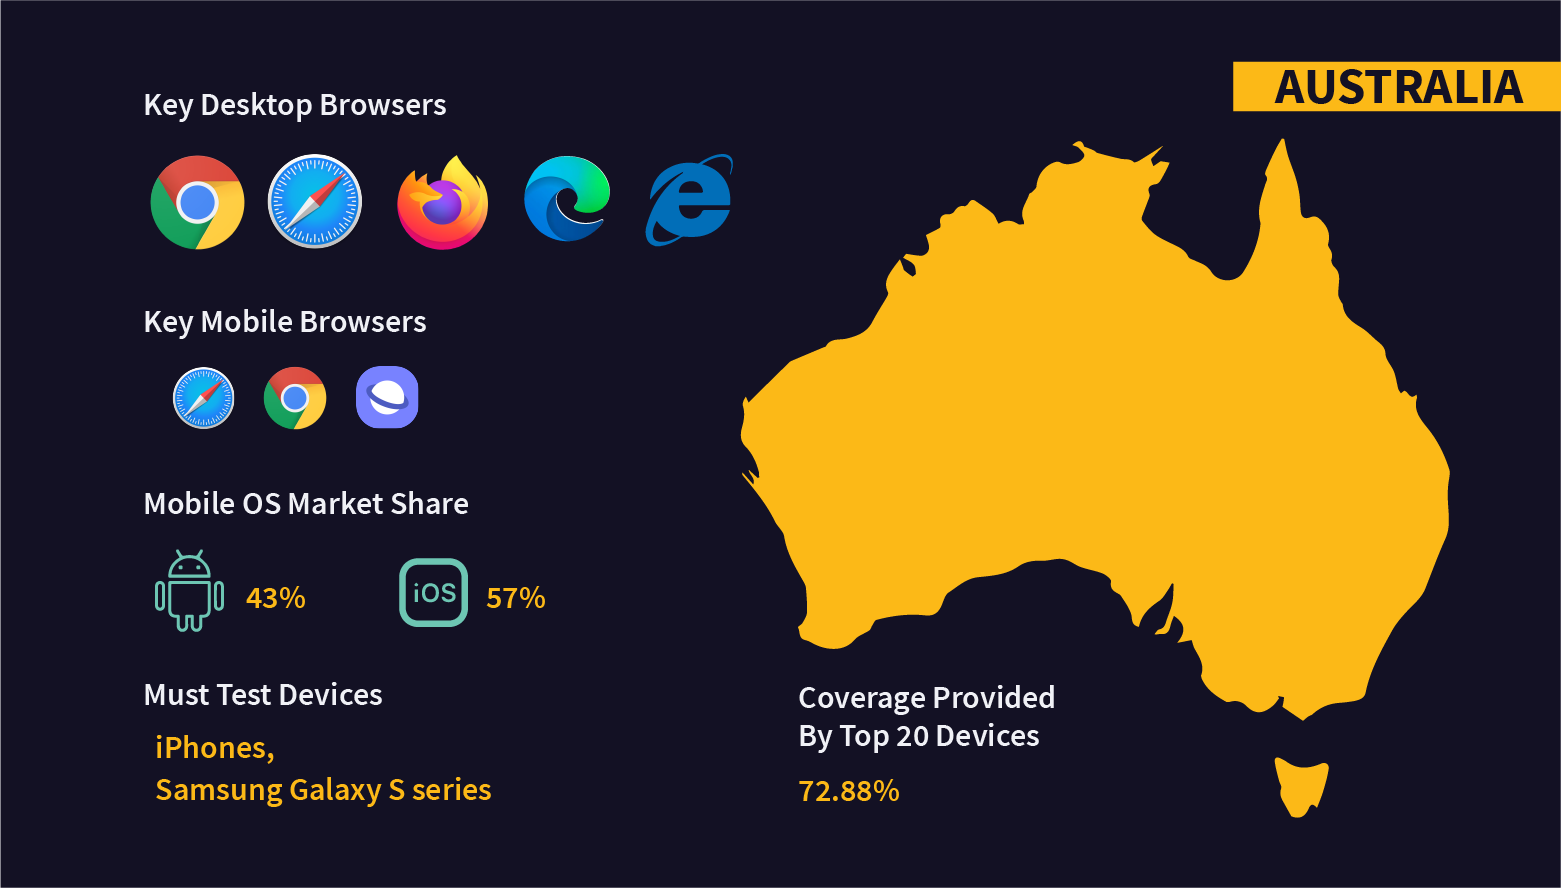 Fragmentation in OS, browsers, and devices in Australia